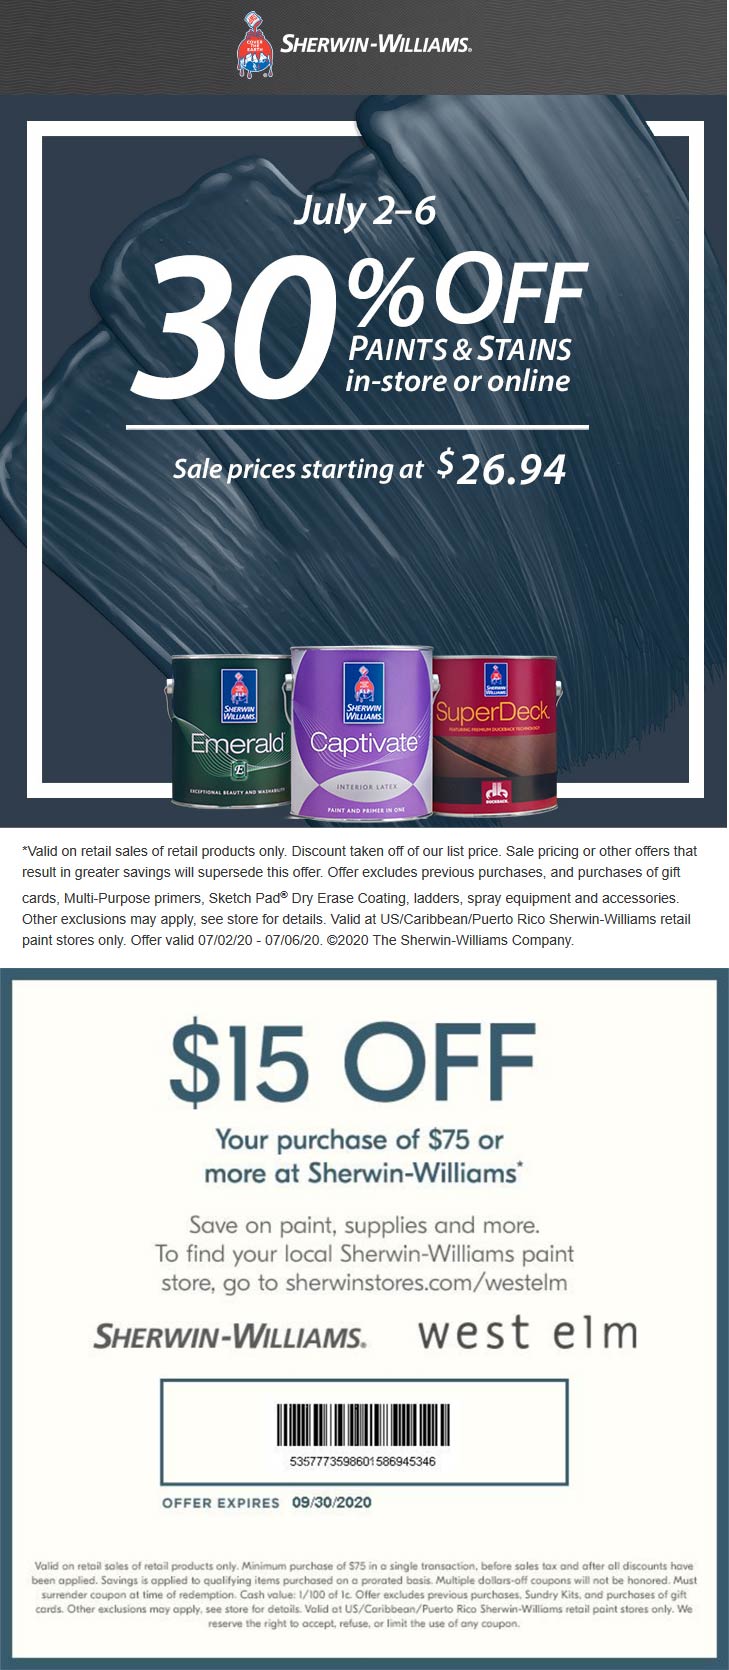 September 2021 30 Off Paints Stains At Sherwin Williams Ditto Online Sherwinwilliams Coupon Promo Code The Coupons App